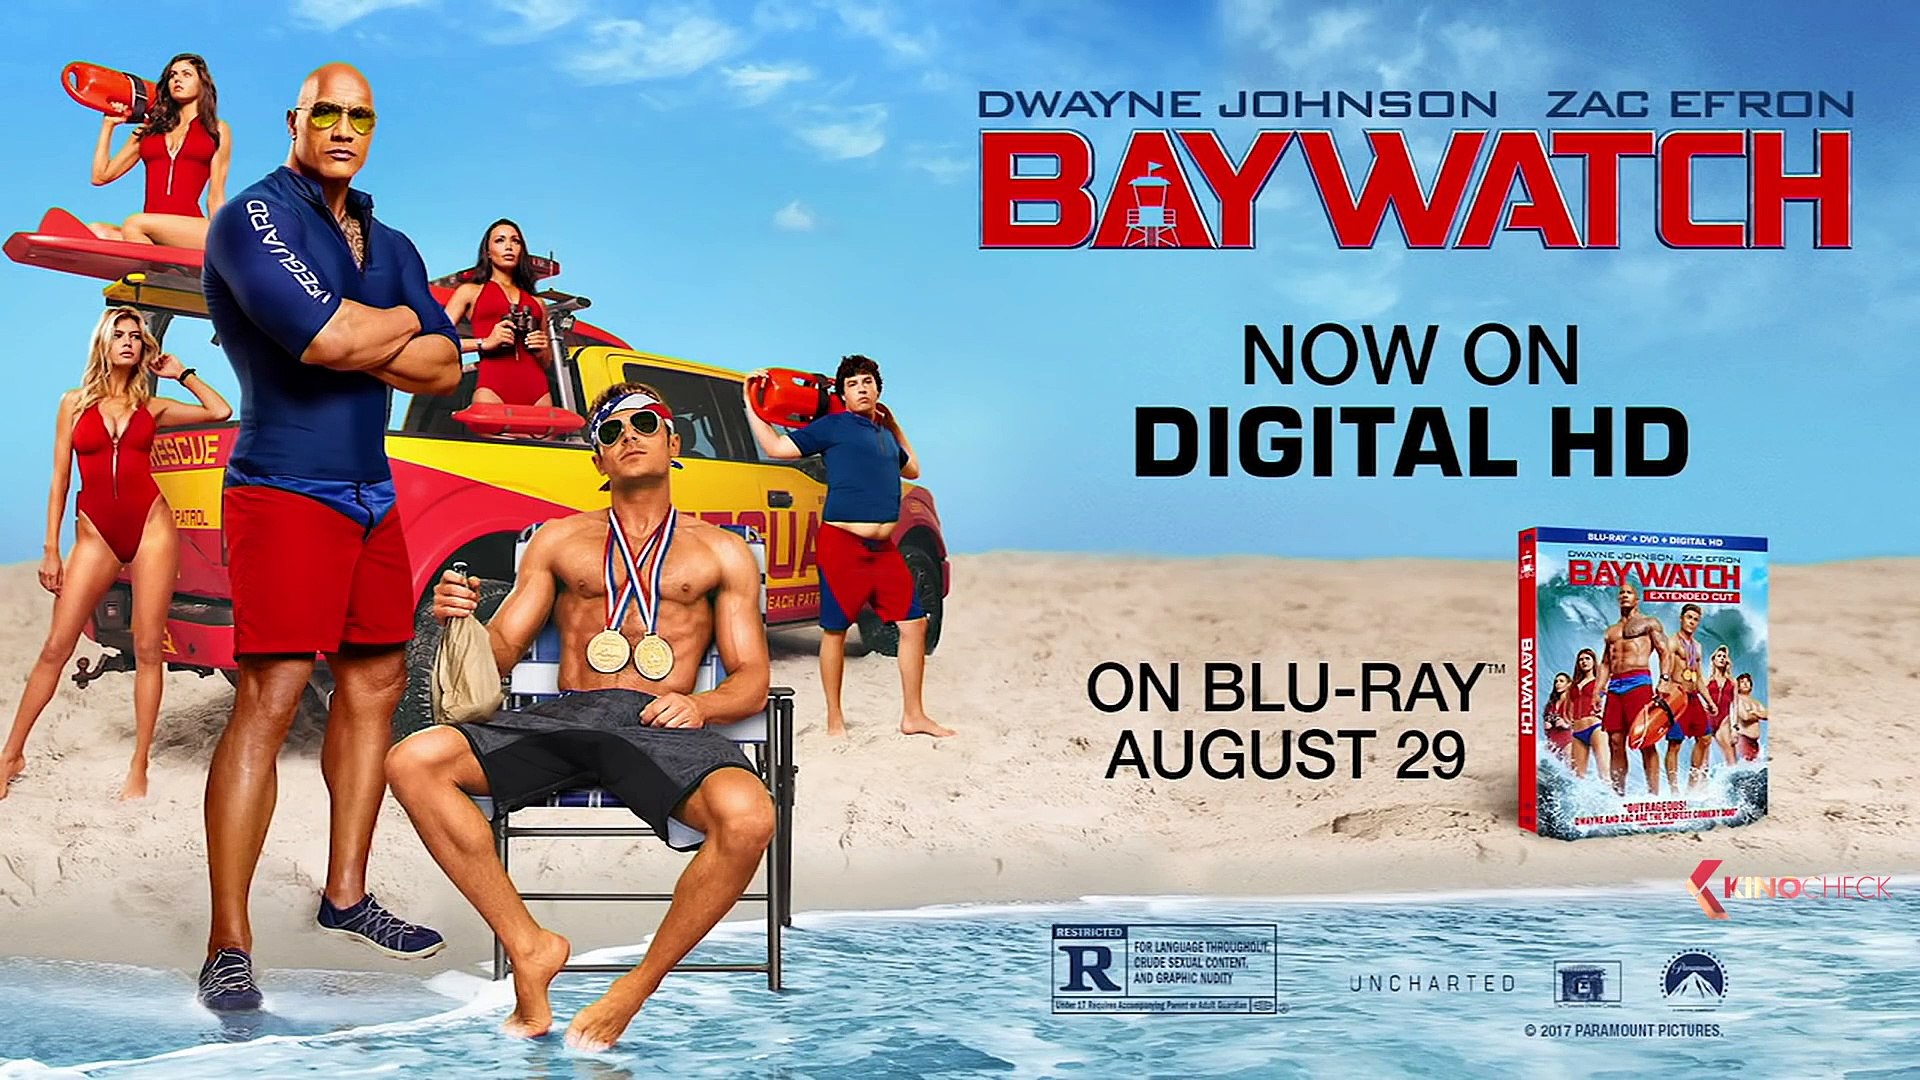 BAYWATCH Deleted Scenes (2017) - video Dailymotion